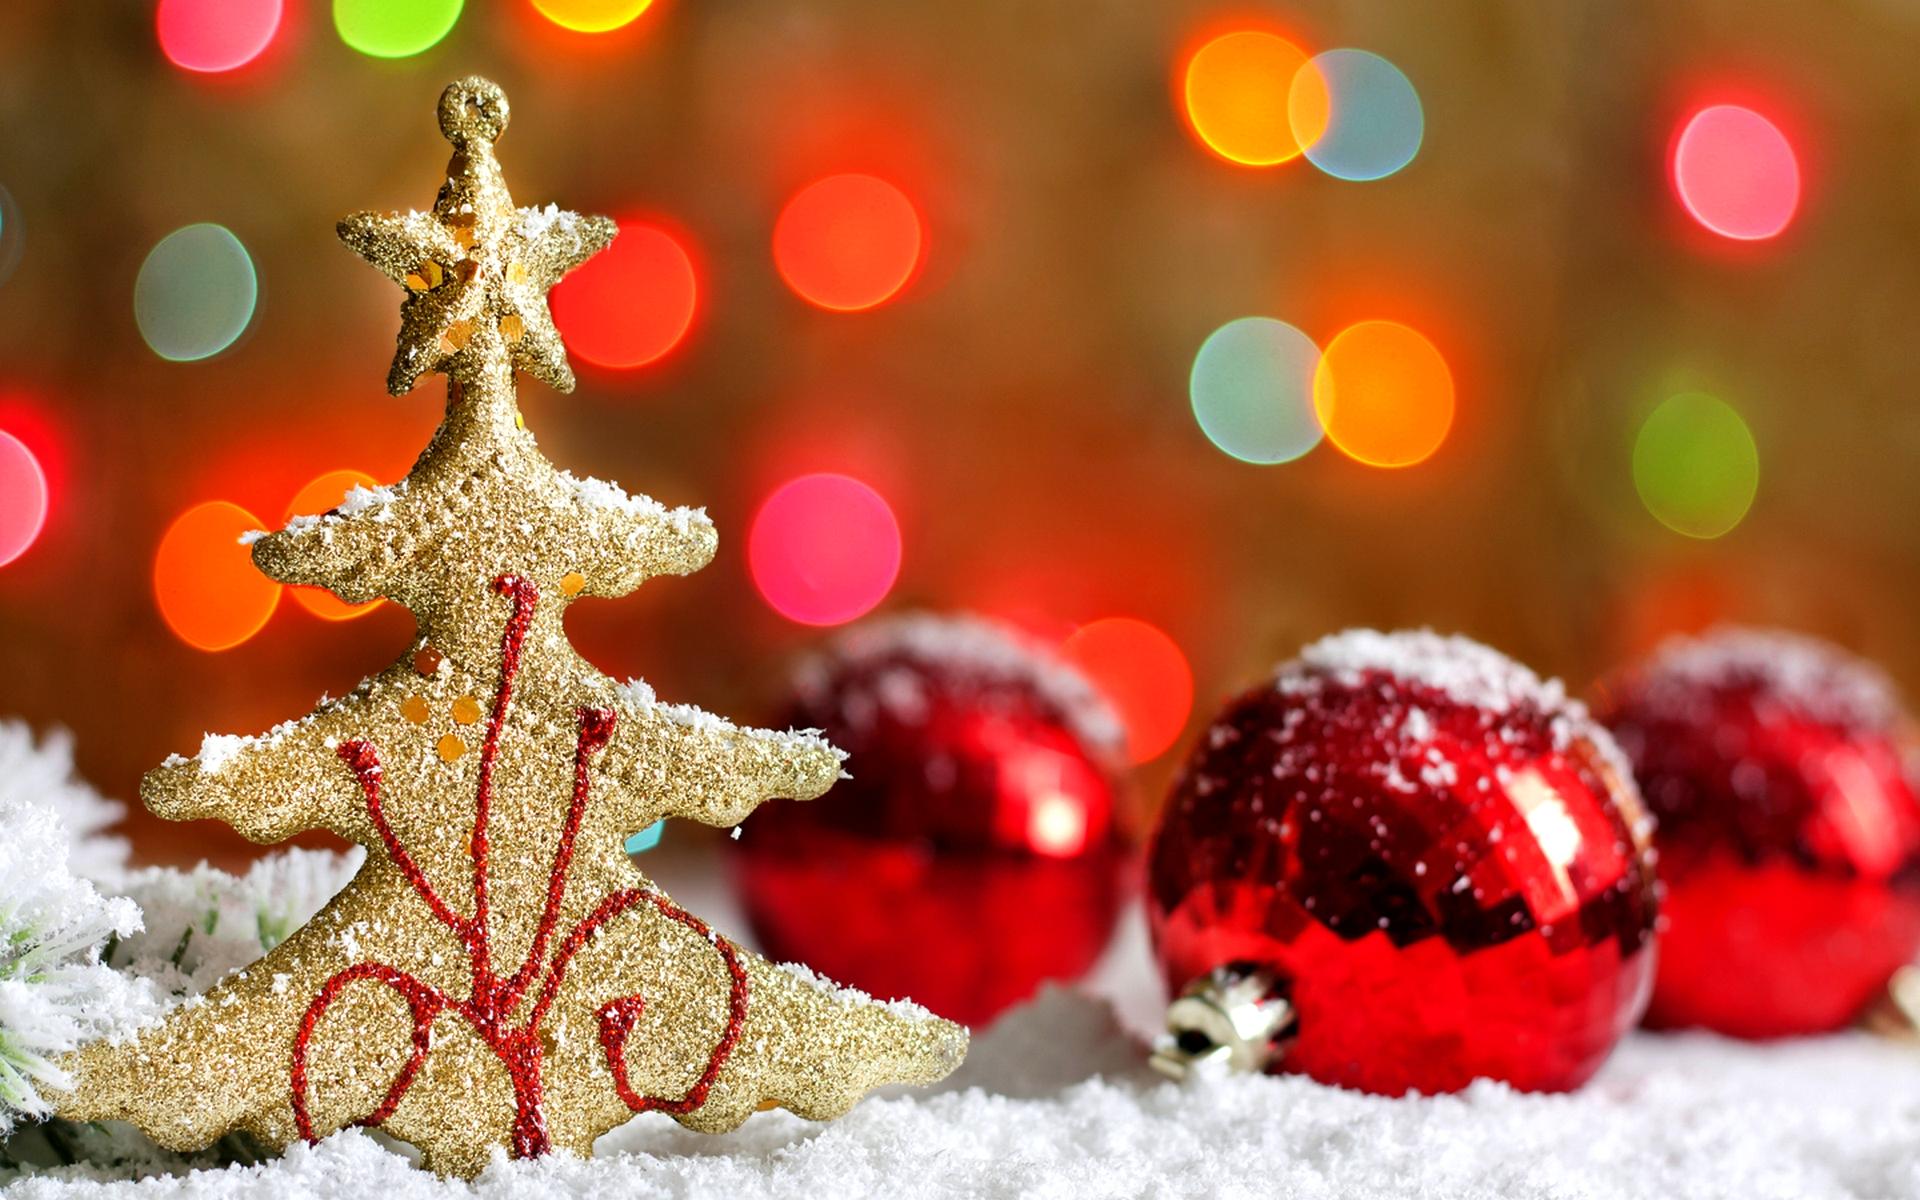 Christmas Holiday Decorations wallpaper Gallery